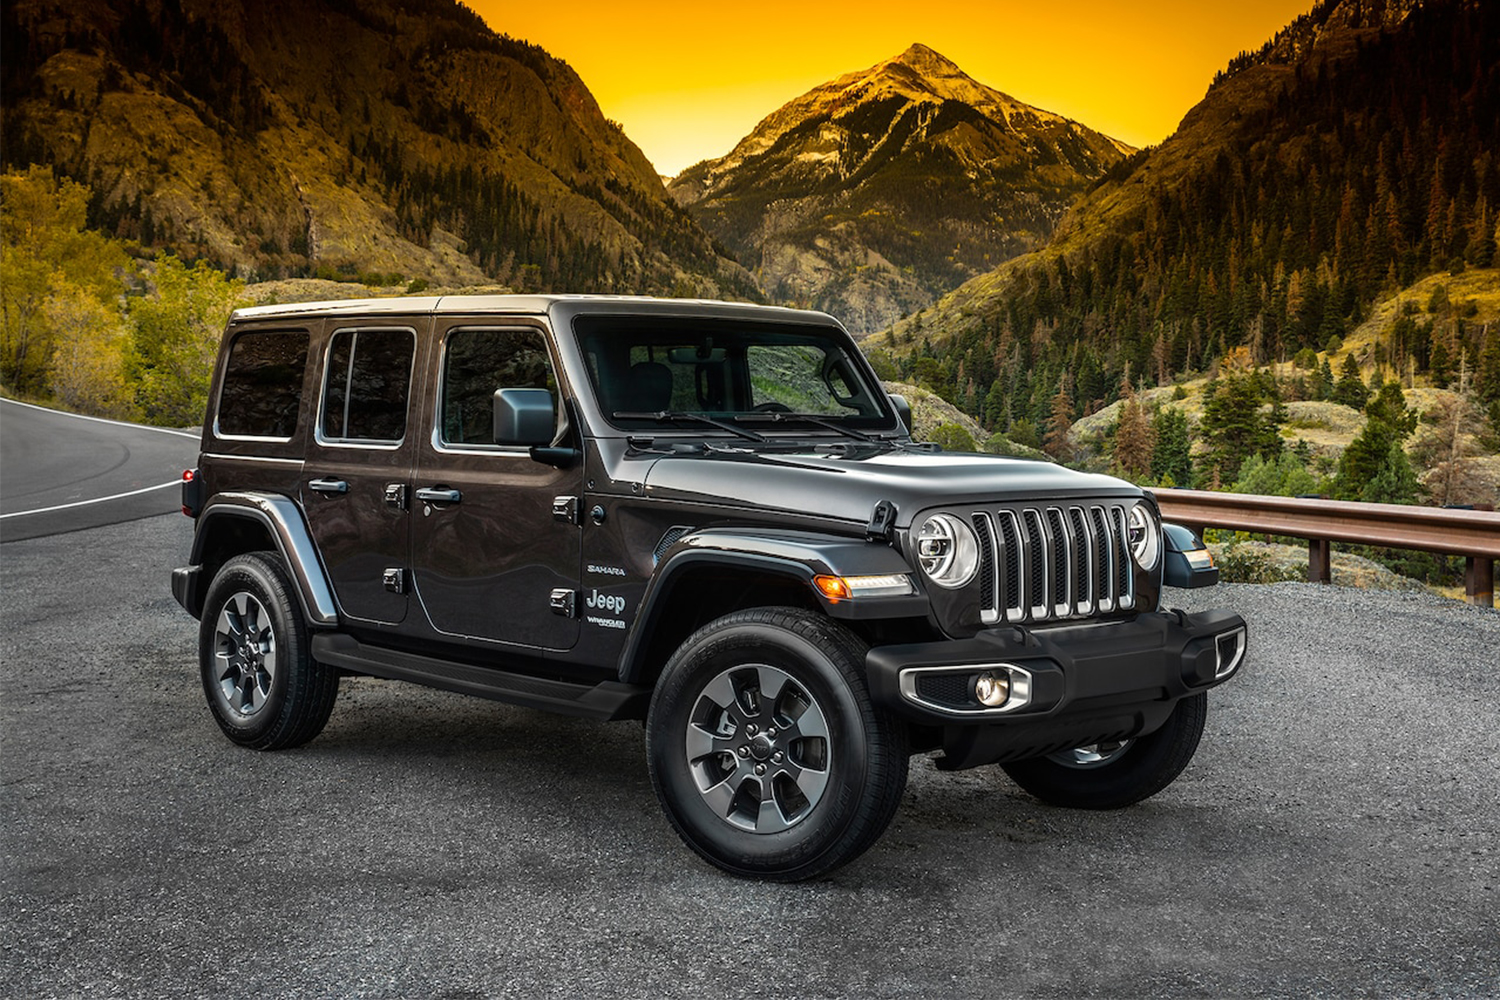 Dealerships across the U.S. are slashing prices on 2018 Jeep Wranglers.